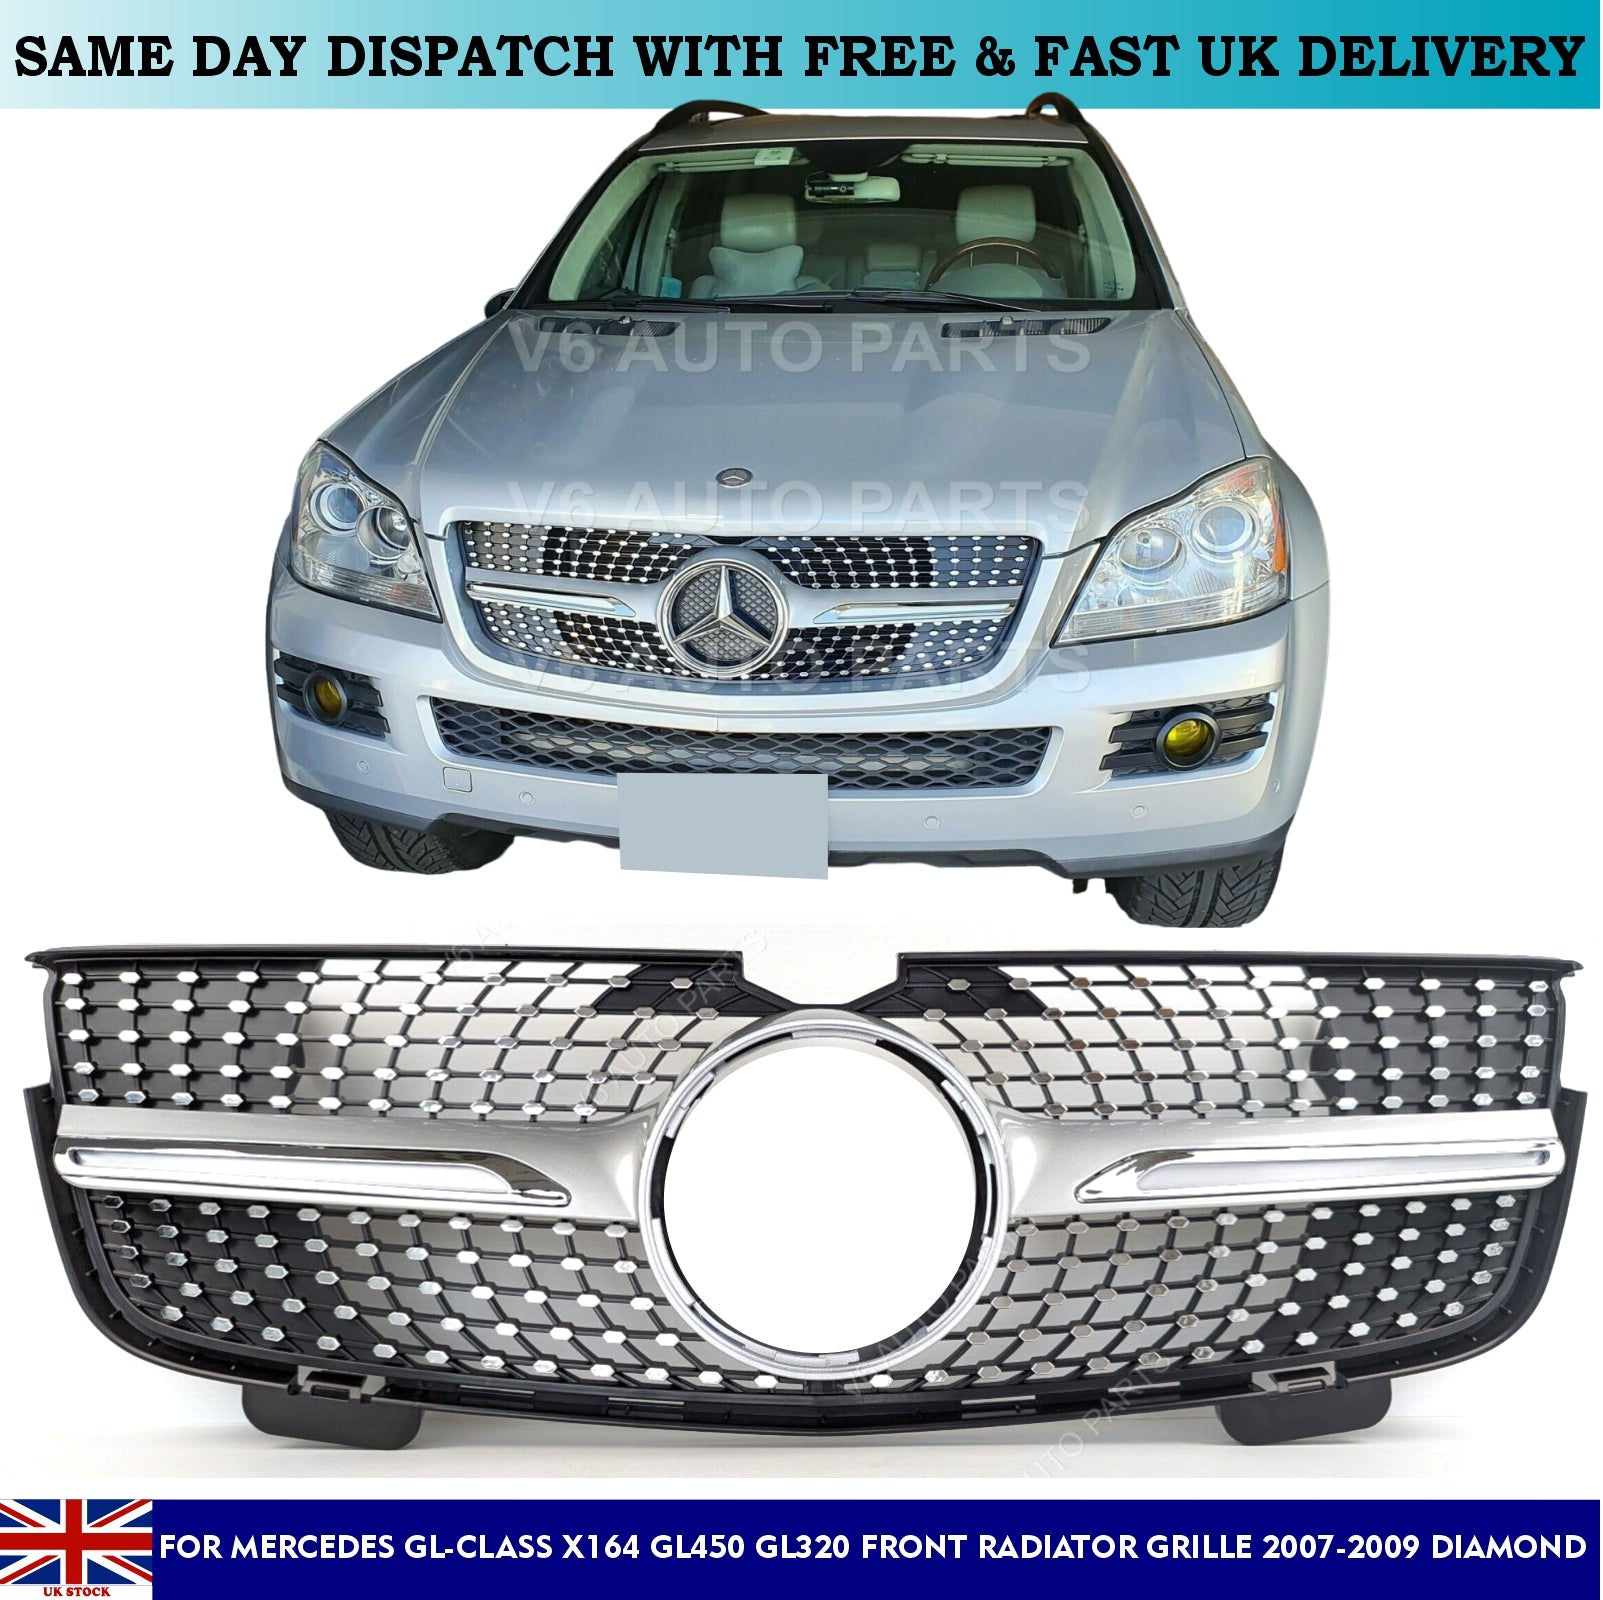 For Mercedes GL-Class X164 GL450 GL320 Front Radiator Grille 2007-2009 Diamond